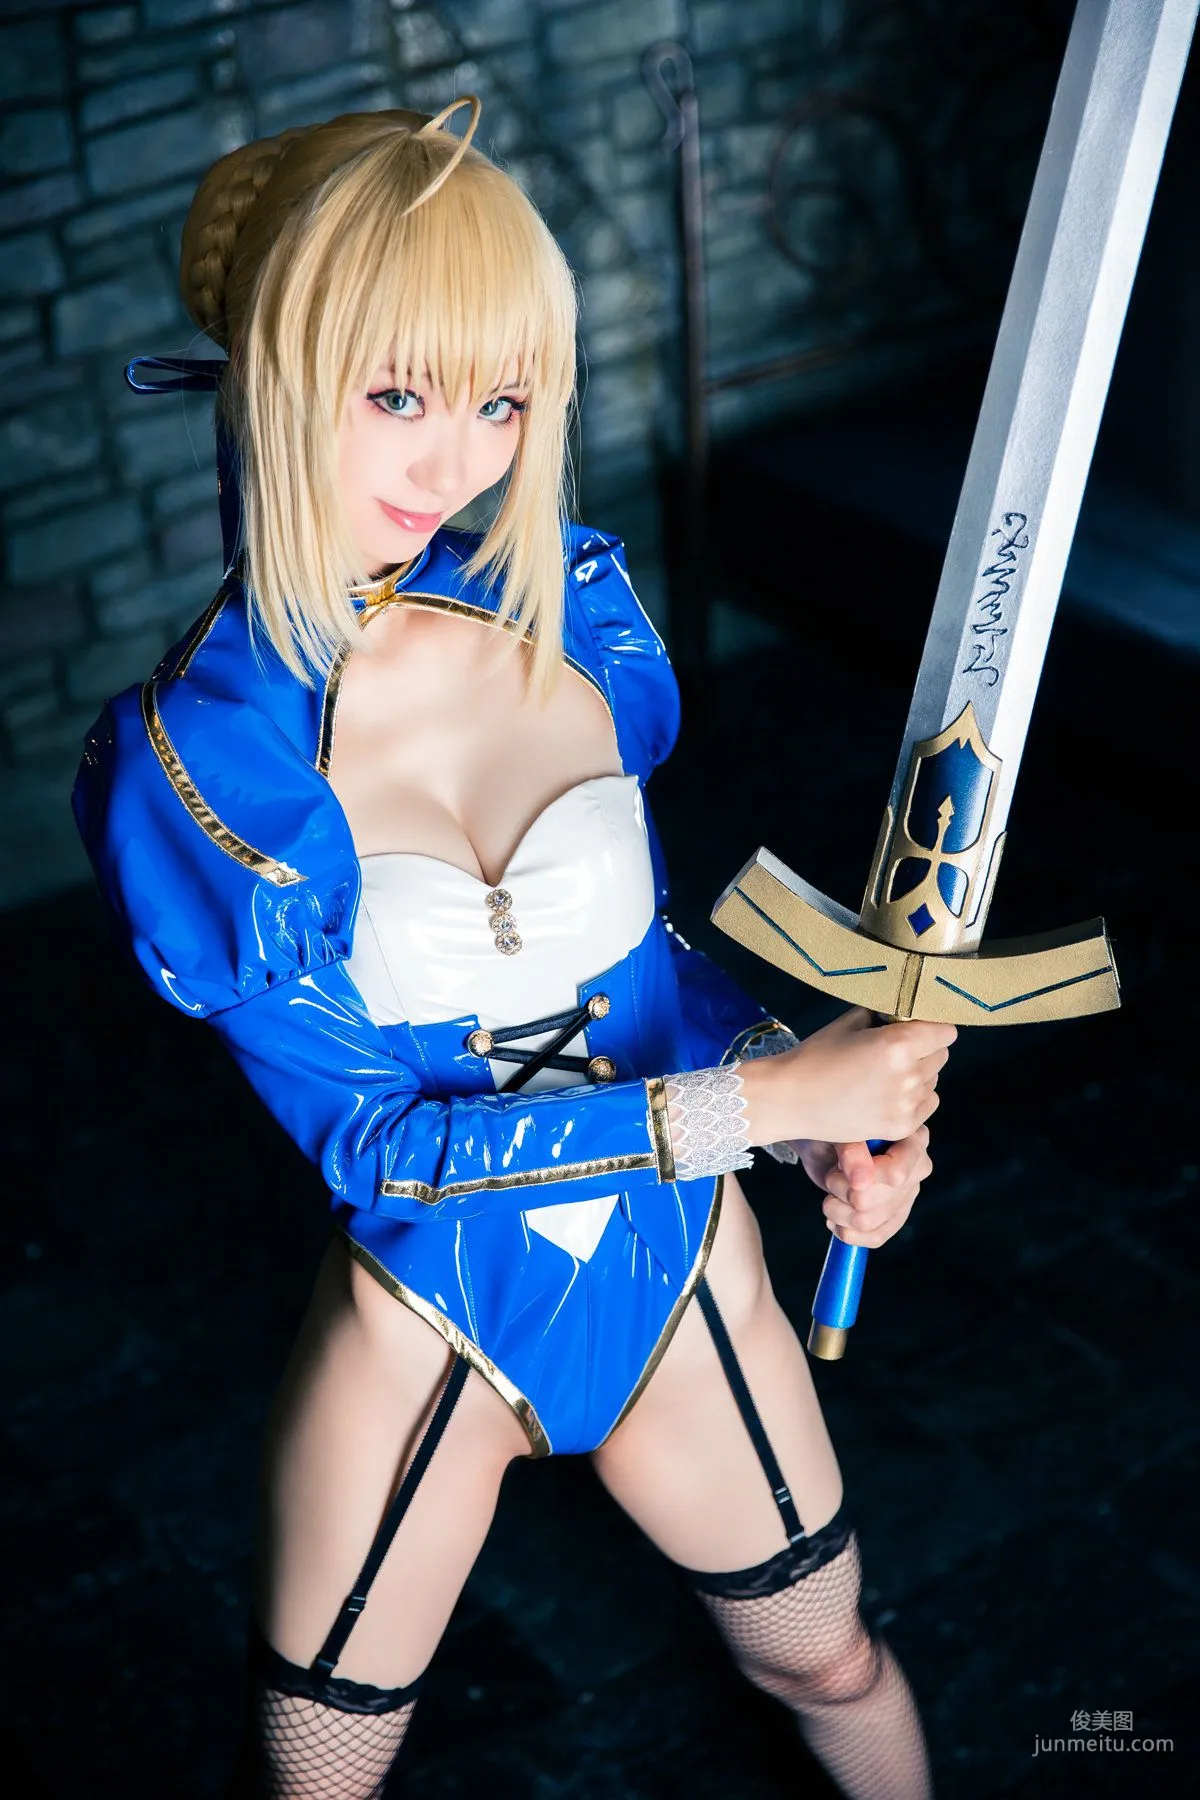 Mike(ミケ) 《Fate stay night》Saber [Mikehouse] 写真集25